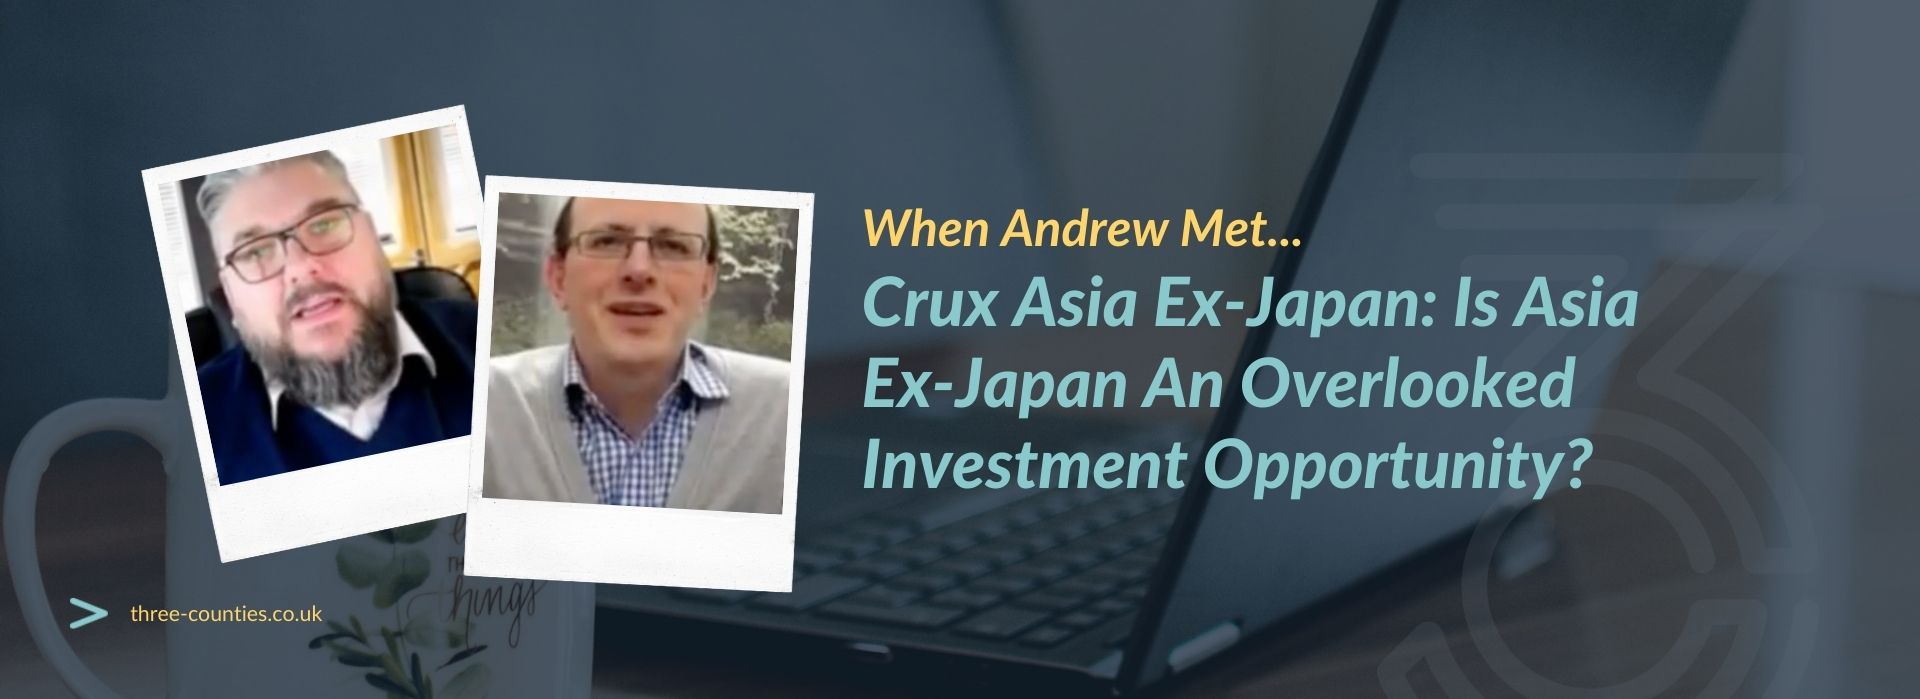 Crux Asia Ex-Japan: Is Asia Ex-Japan An Overlooked Investment Opportunity?